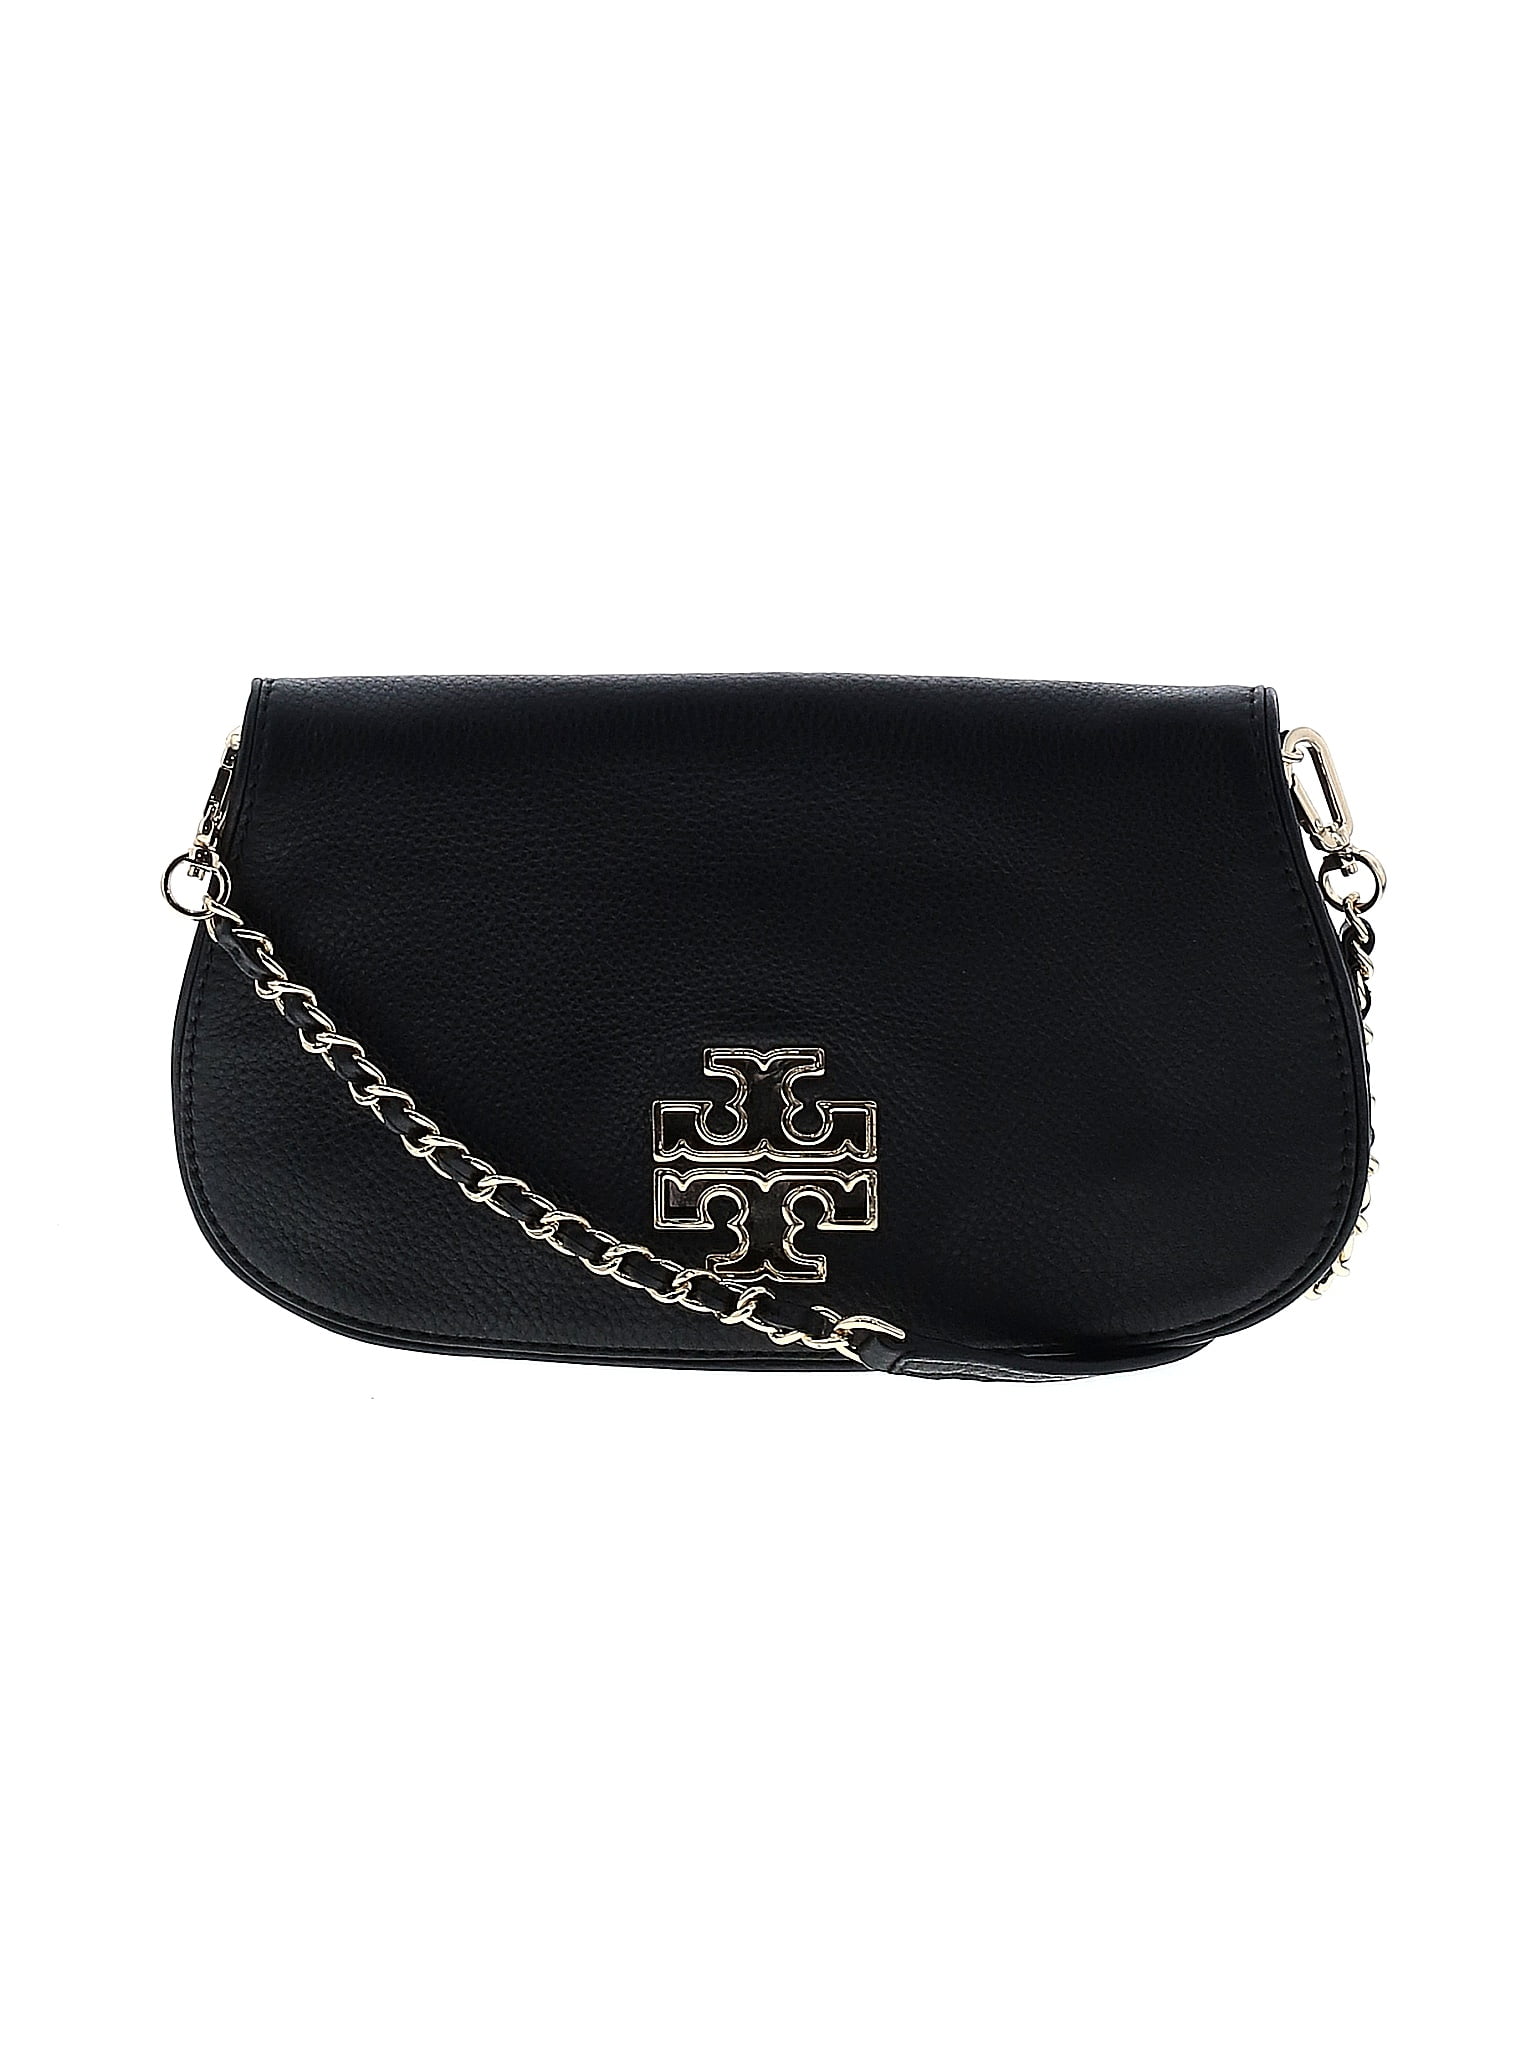 Tory Burch 100% Leather Solid Black Leather Crossbody Bag One Size - 70 ...